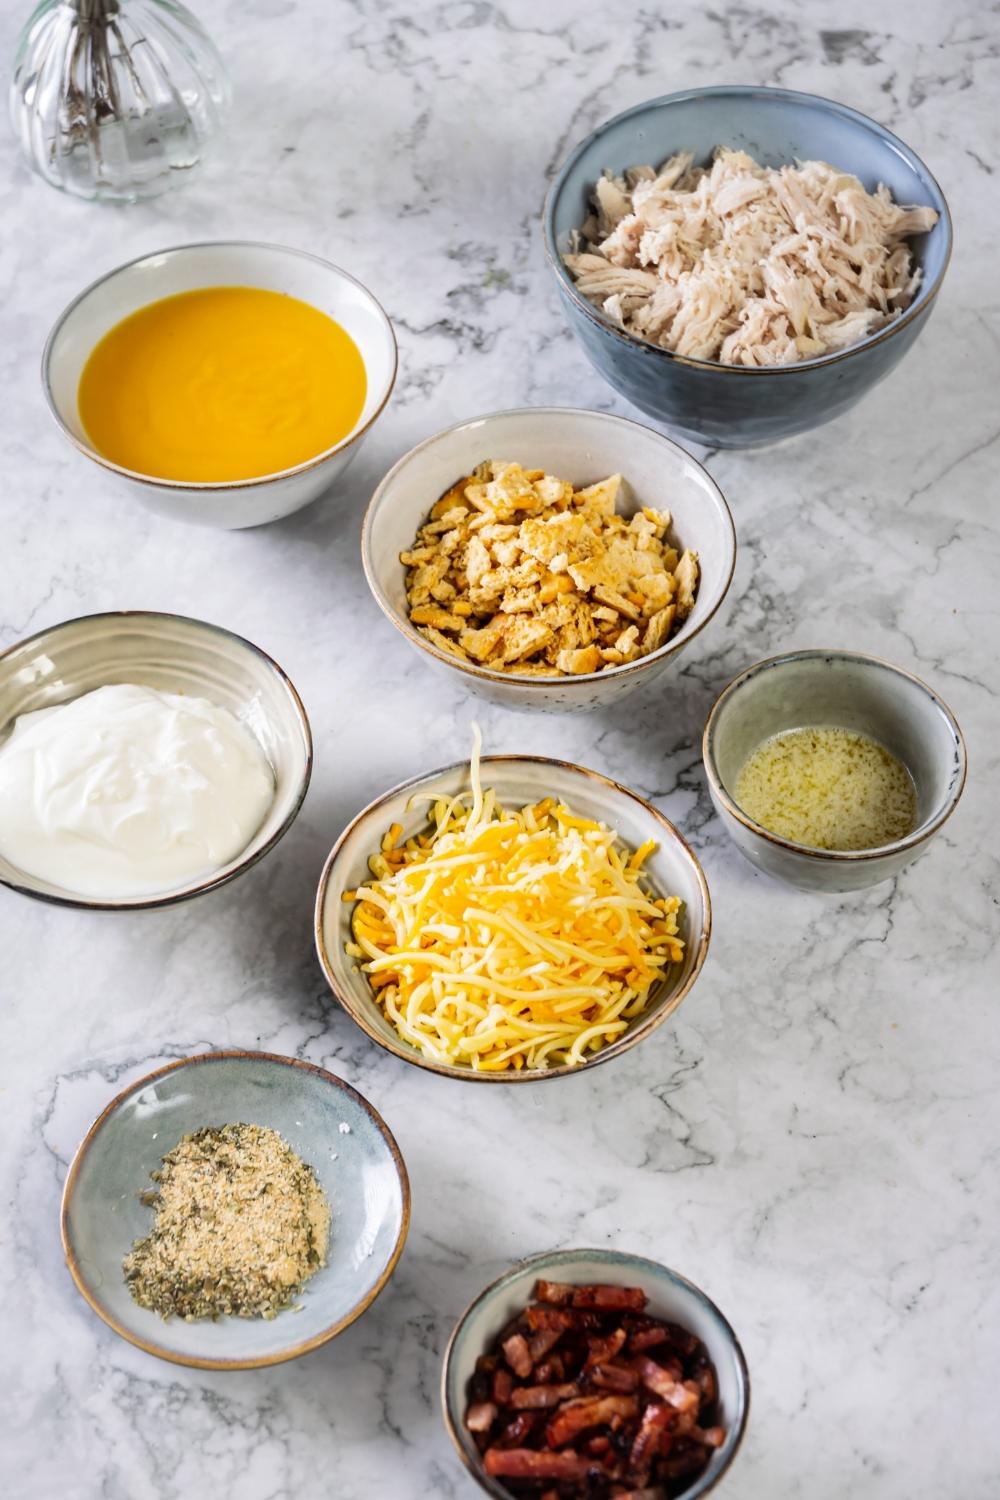 A countertop with bowls containing the ingredients needed to make crack chicken bake.